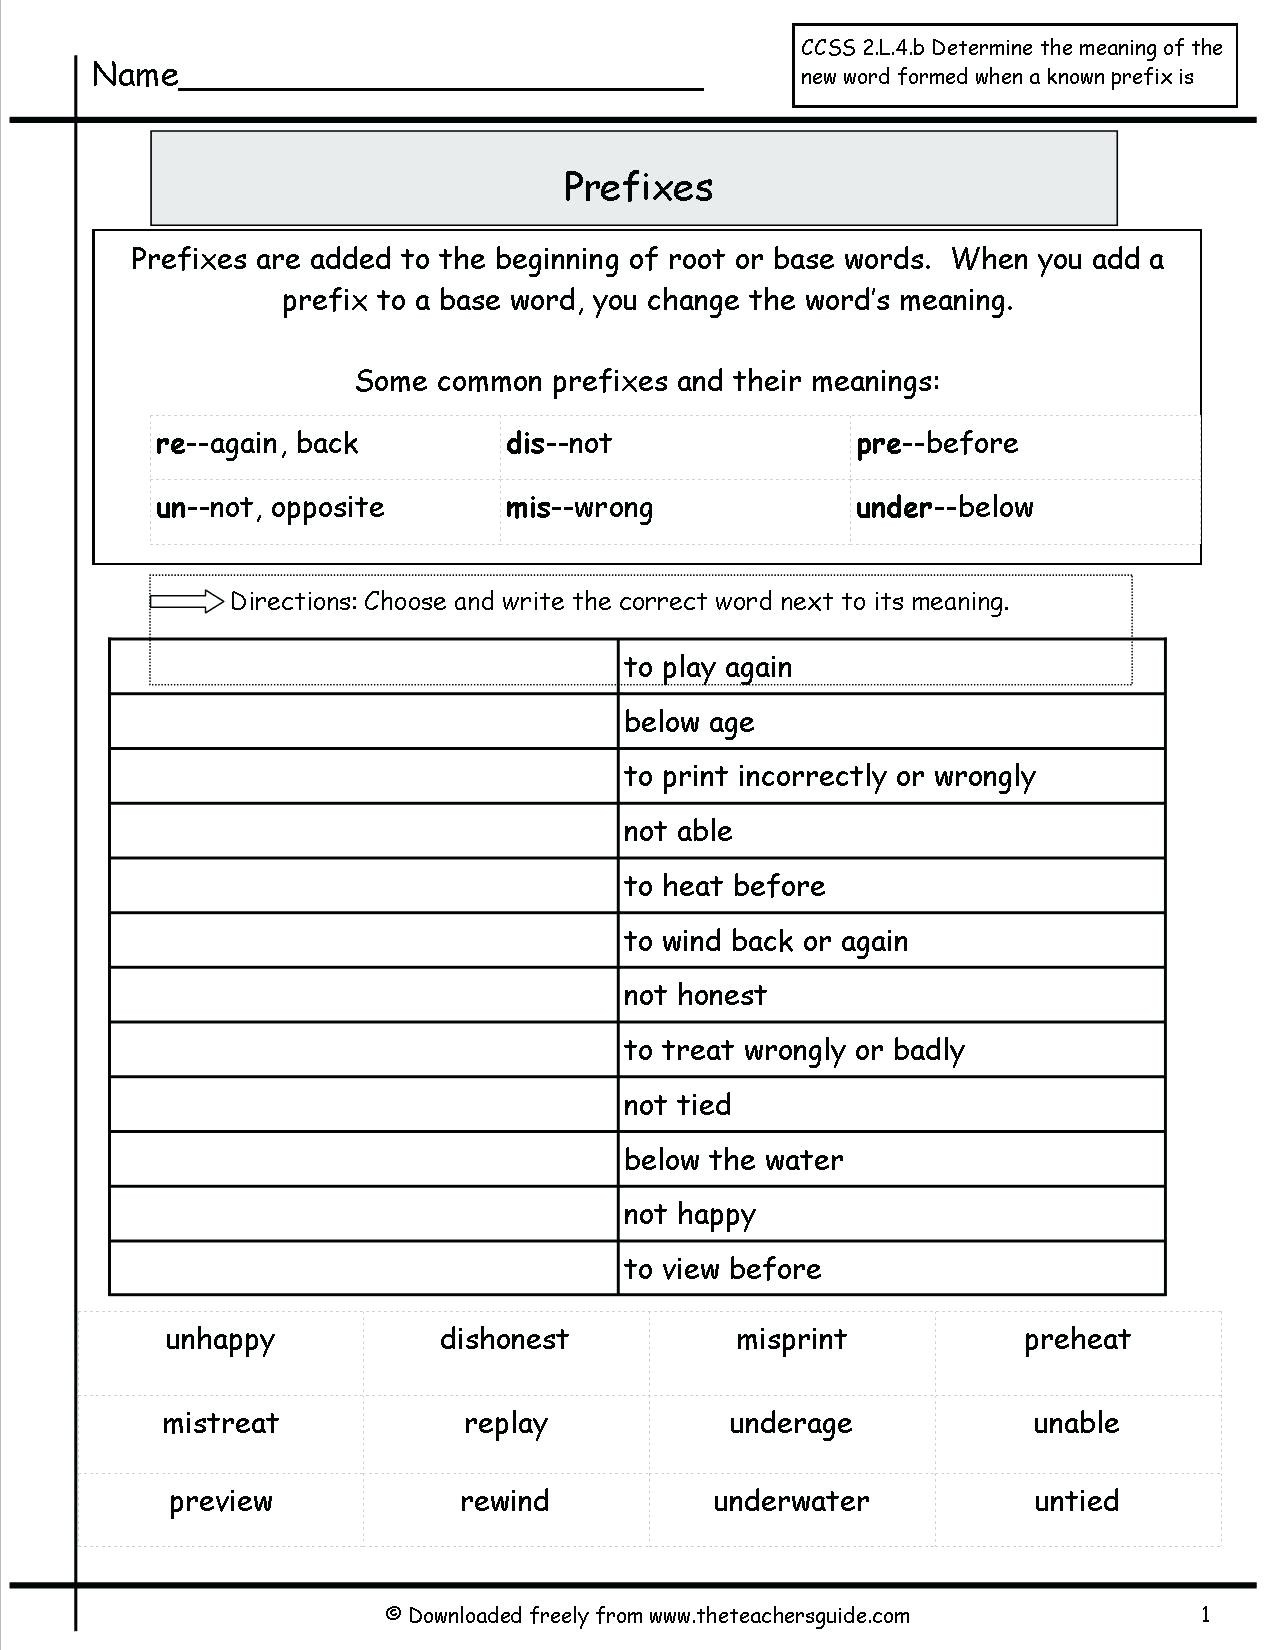 Free 6th Grade Science Worksheets Free Science Worksheets for Grade 2 2nd Grade